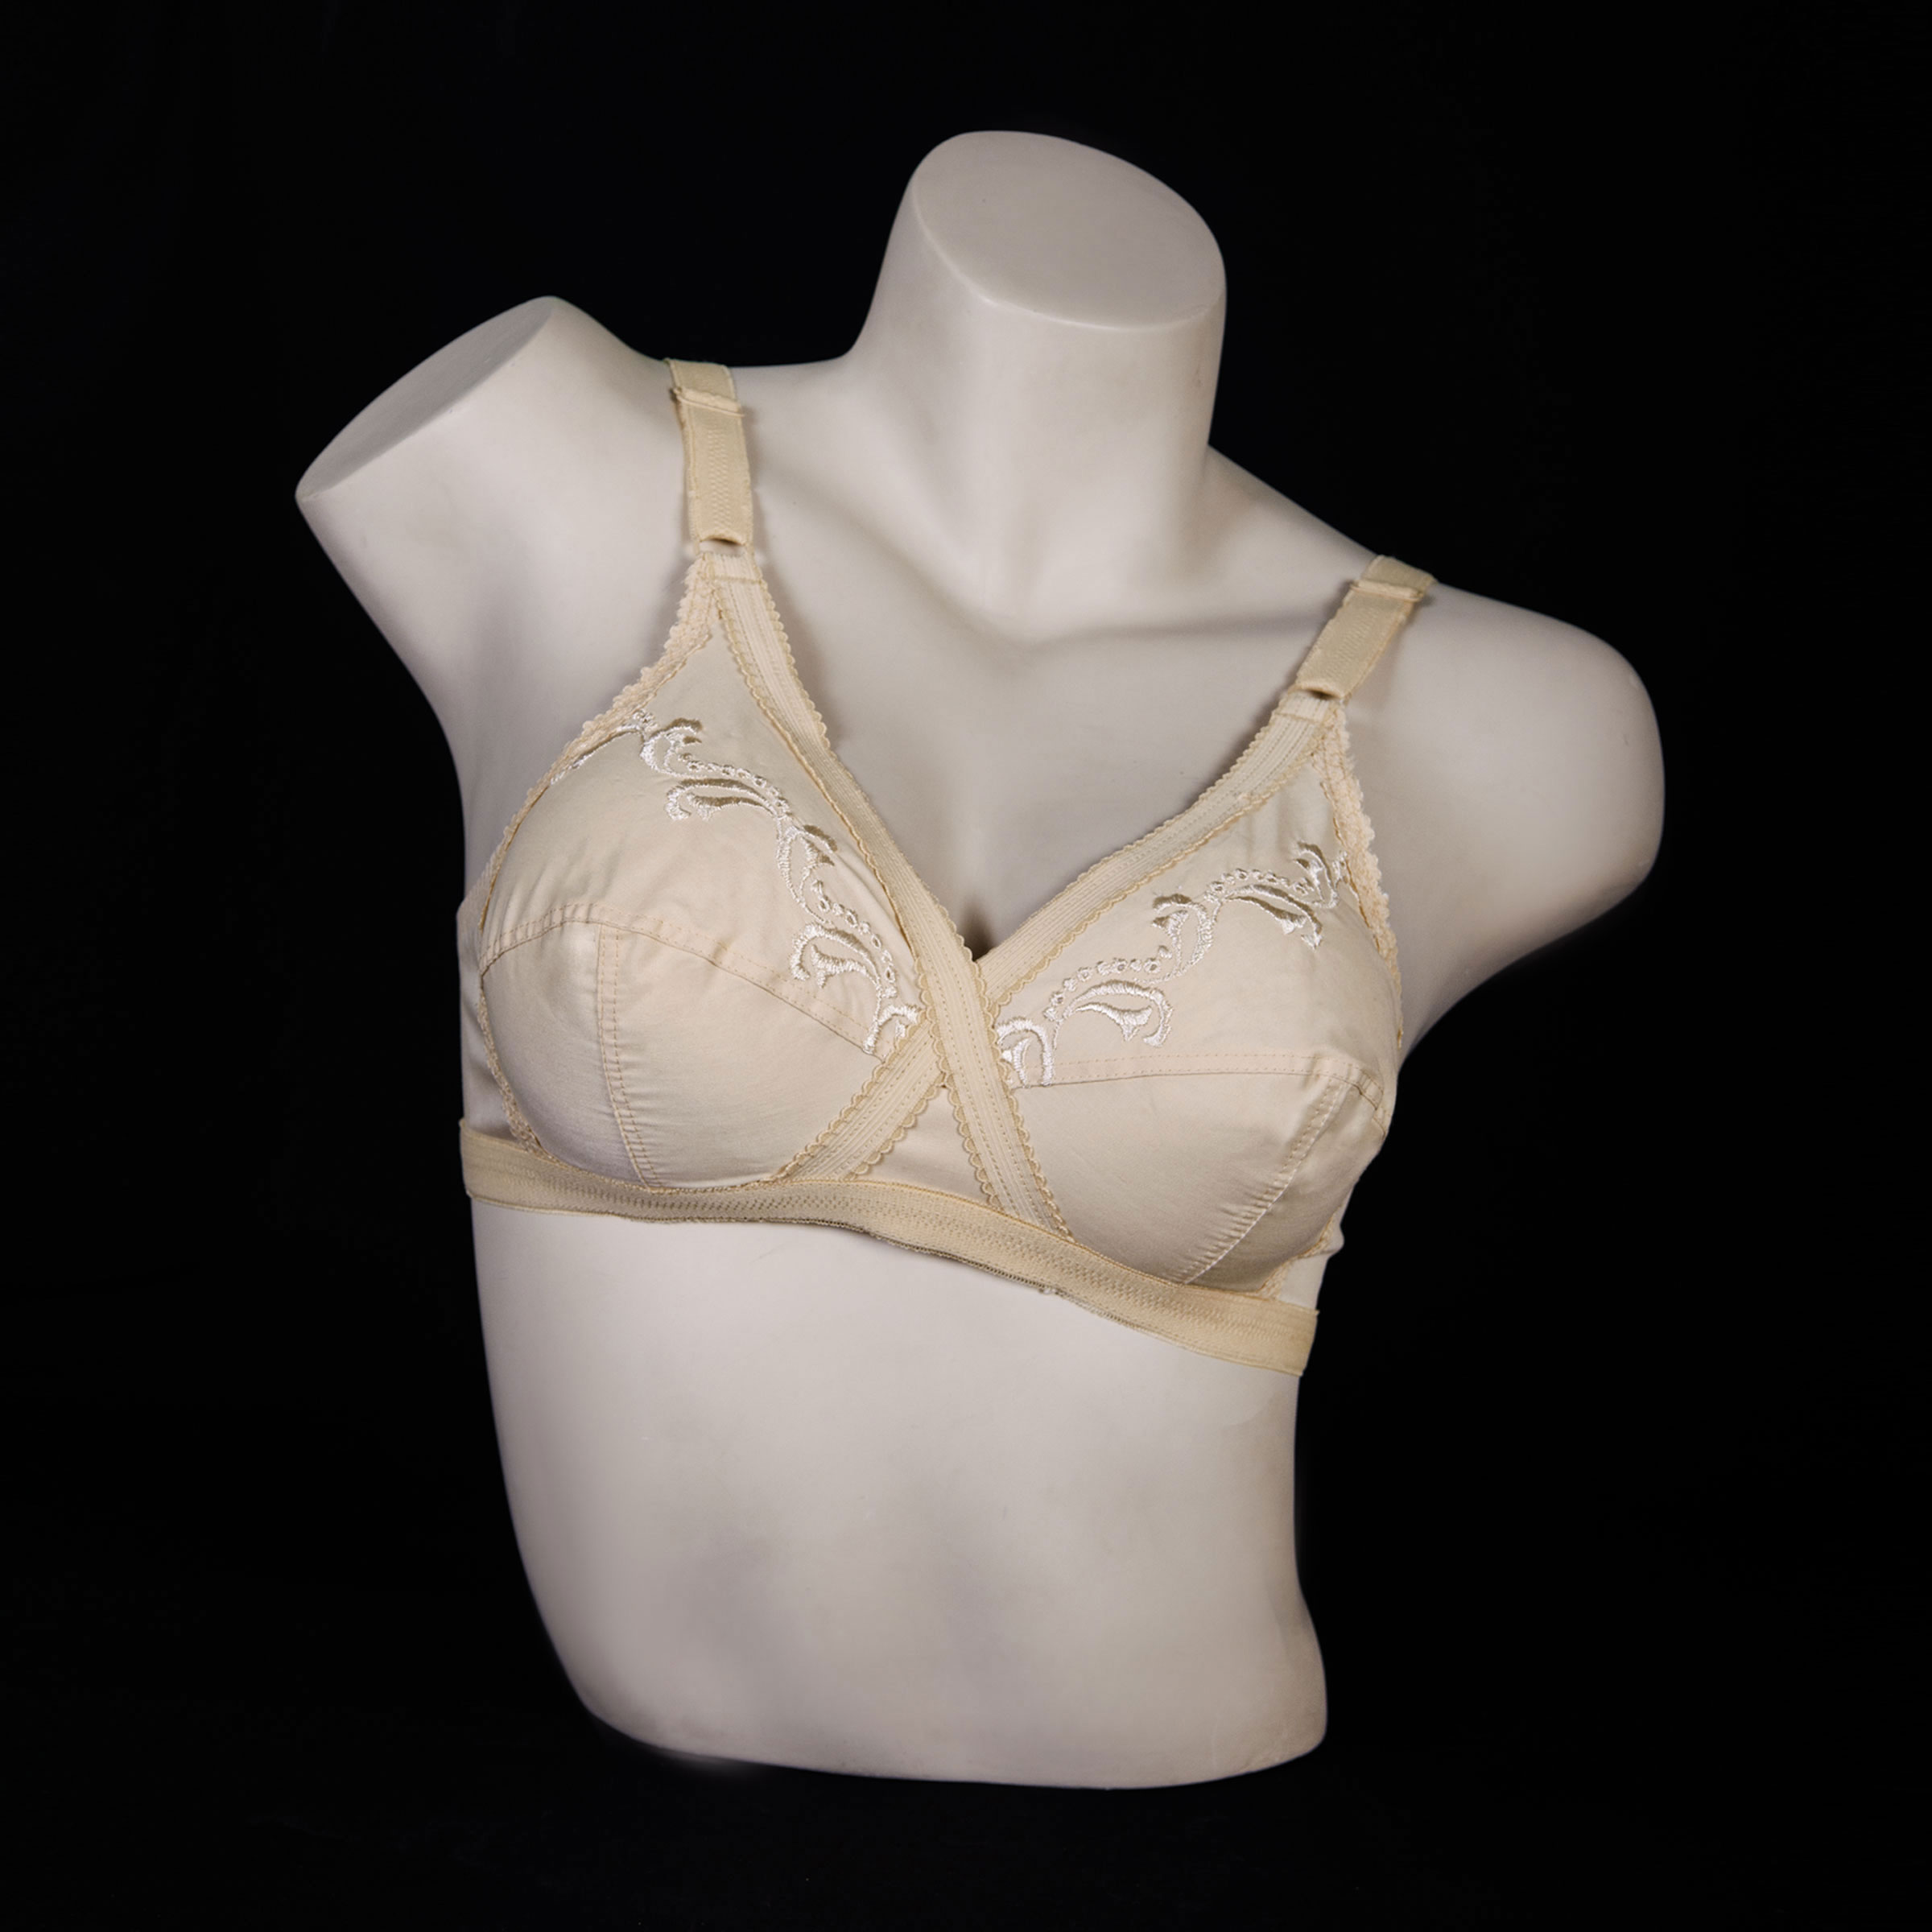 Purchase IFG X-Over Cotton Bra, White Online at Special Price in Pakistan 